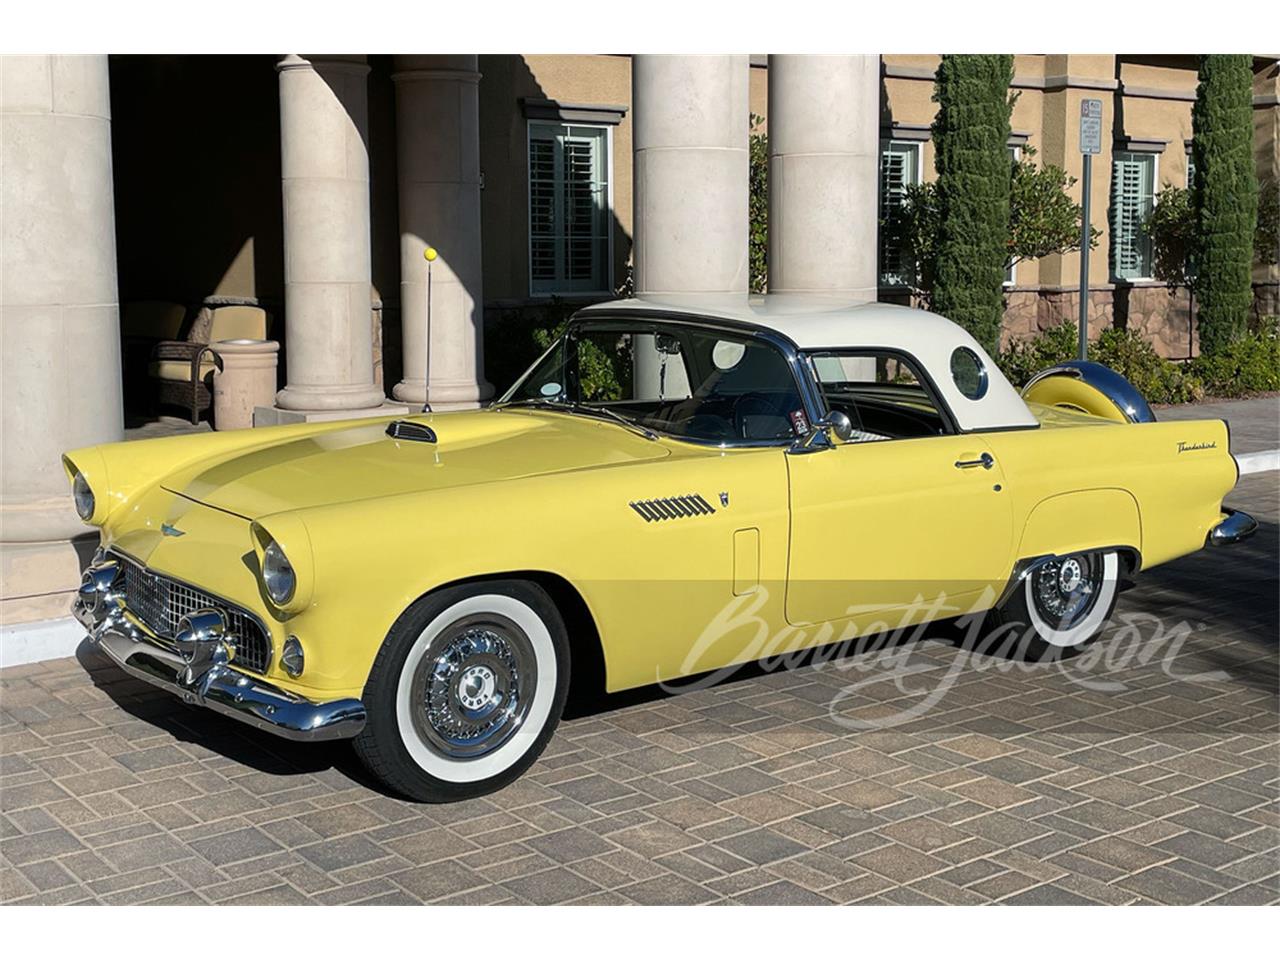 For Sale at Auction: 1956 Ford Thunderbird in Scottsdale, Arizona for sale in Scottsdale, AZ